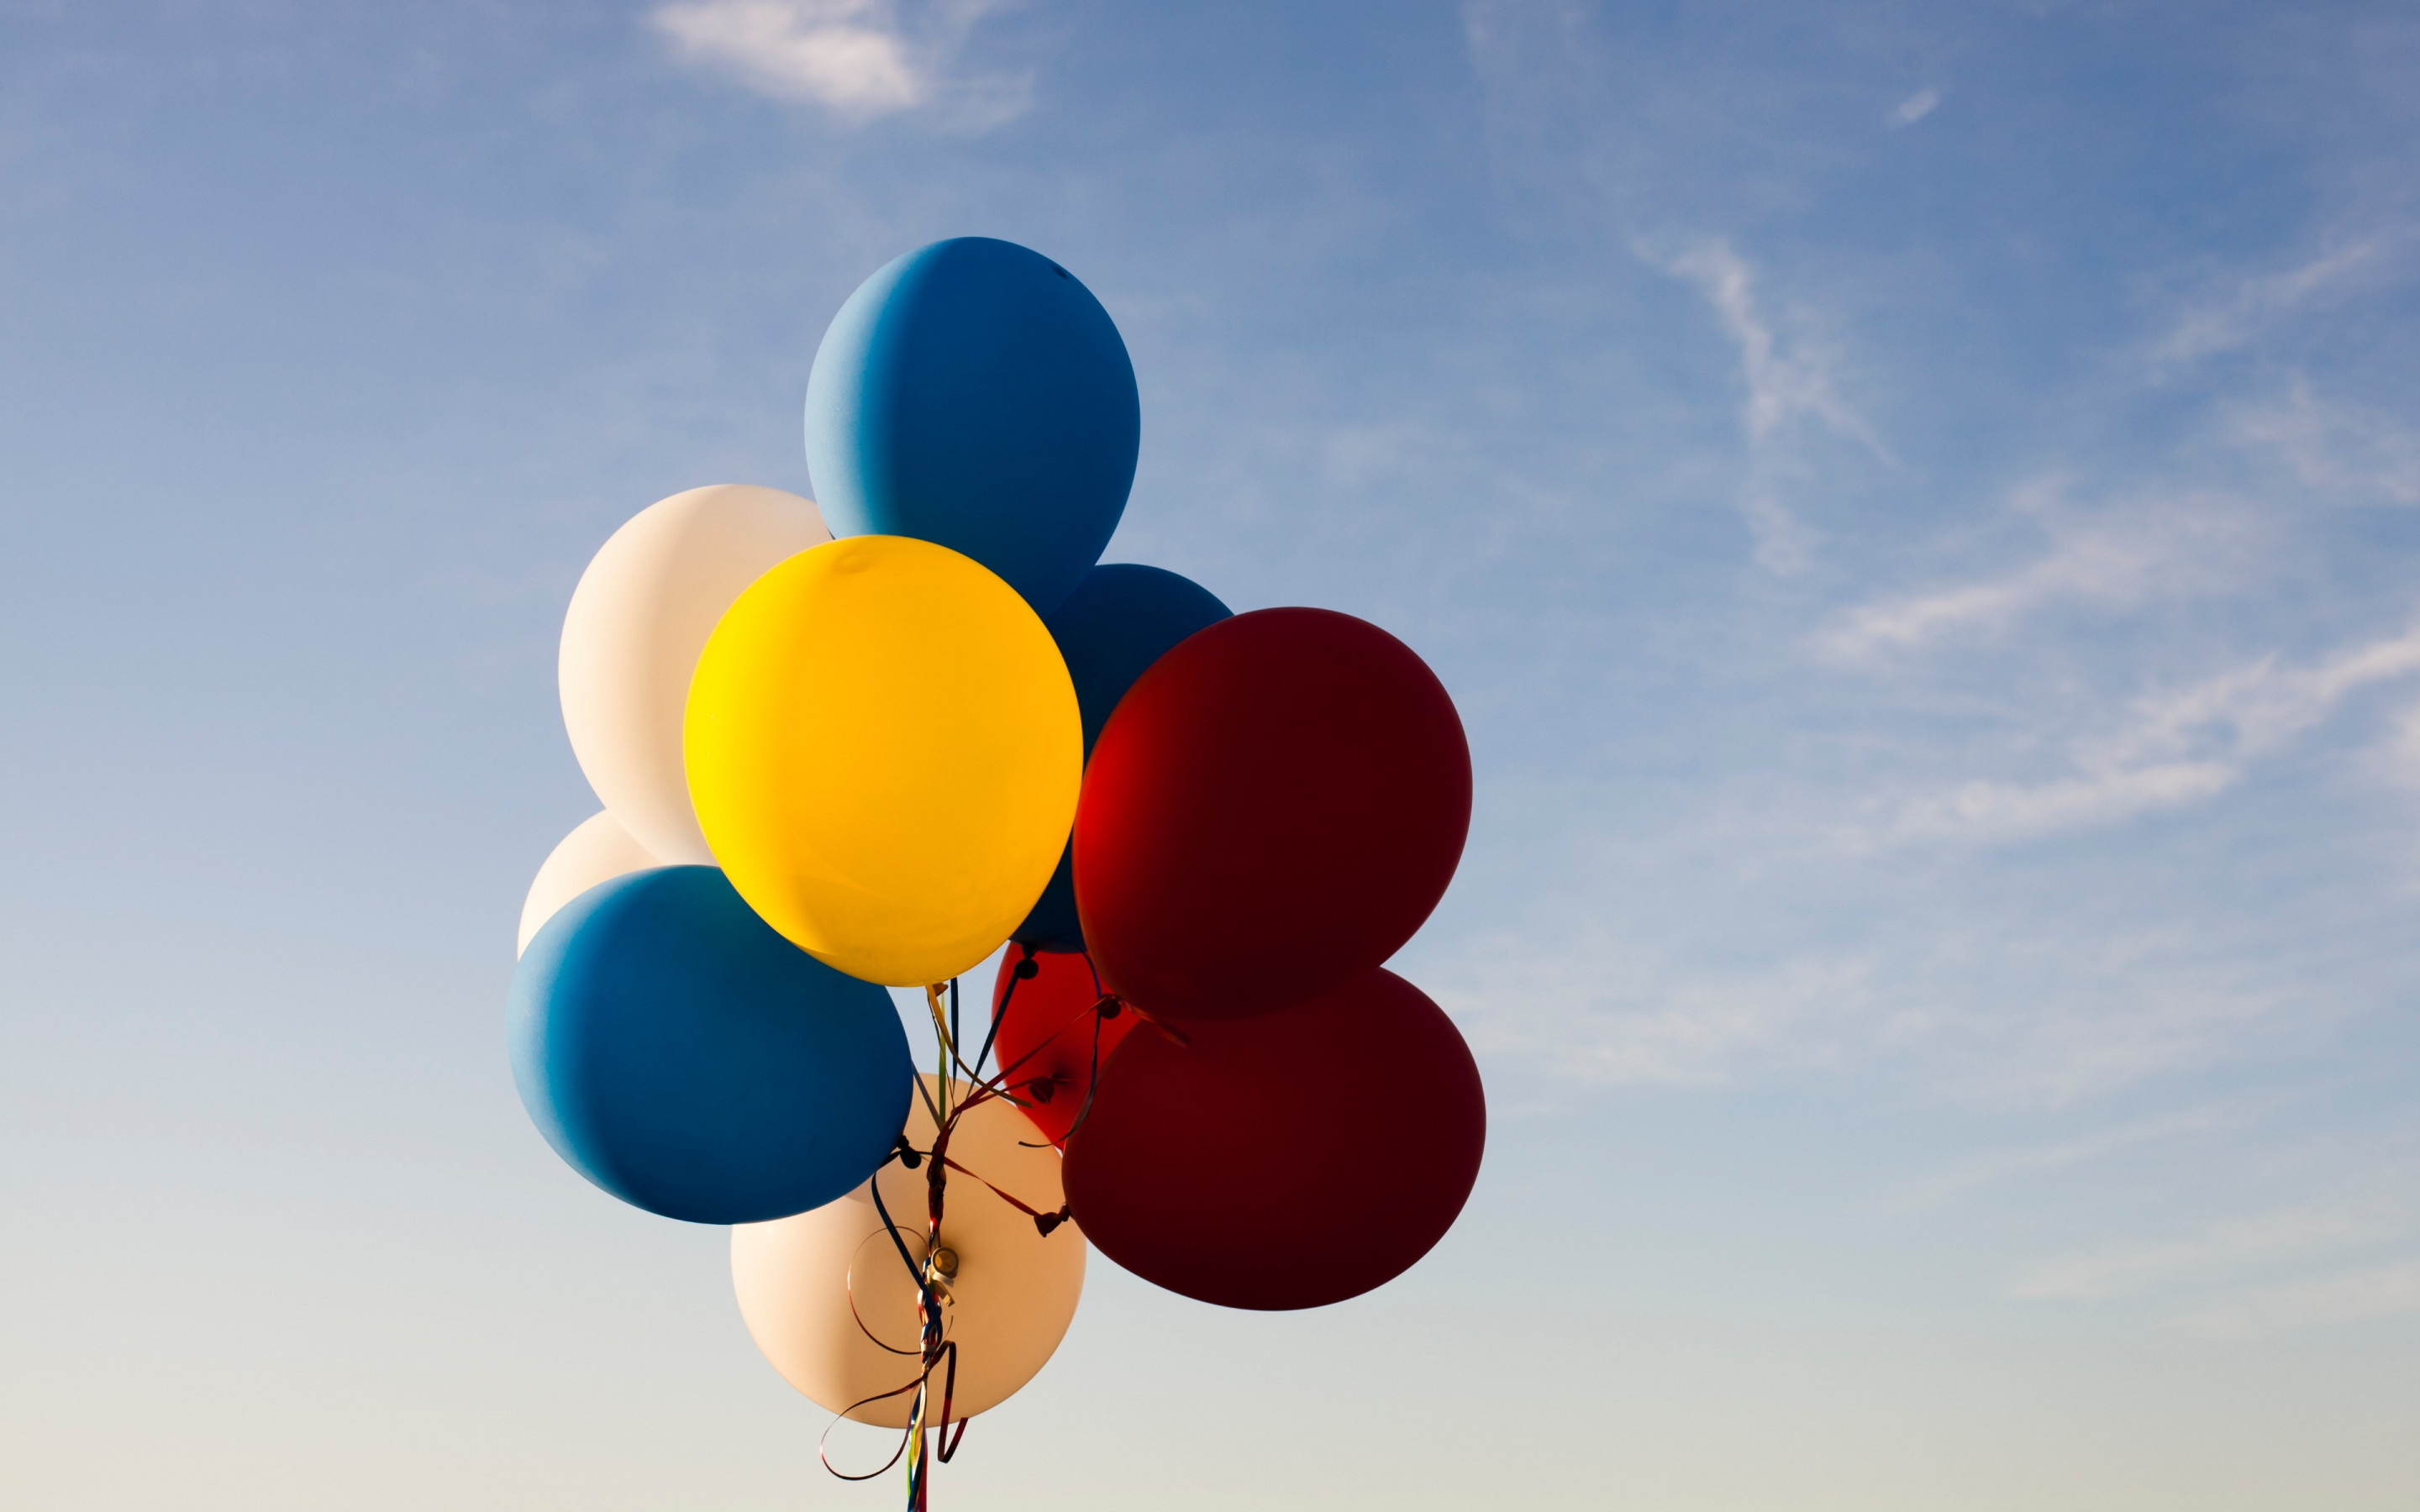 Colored balloons wallpaper 2880x1800